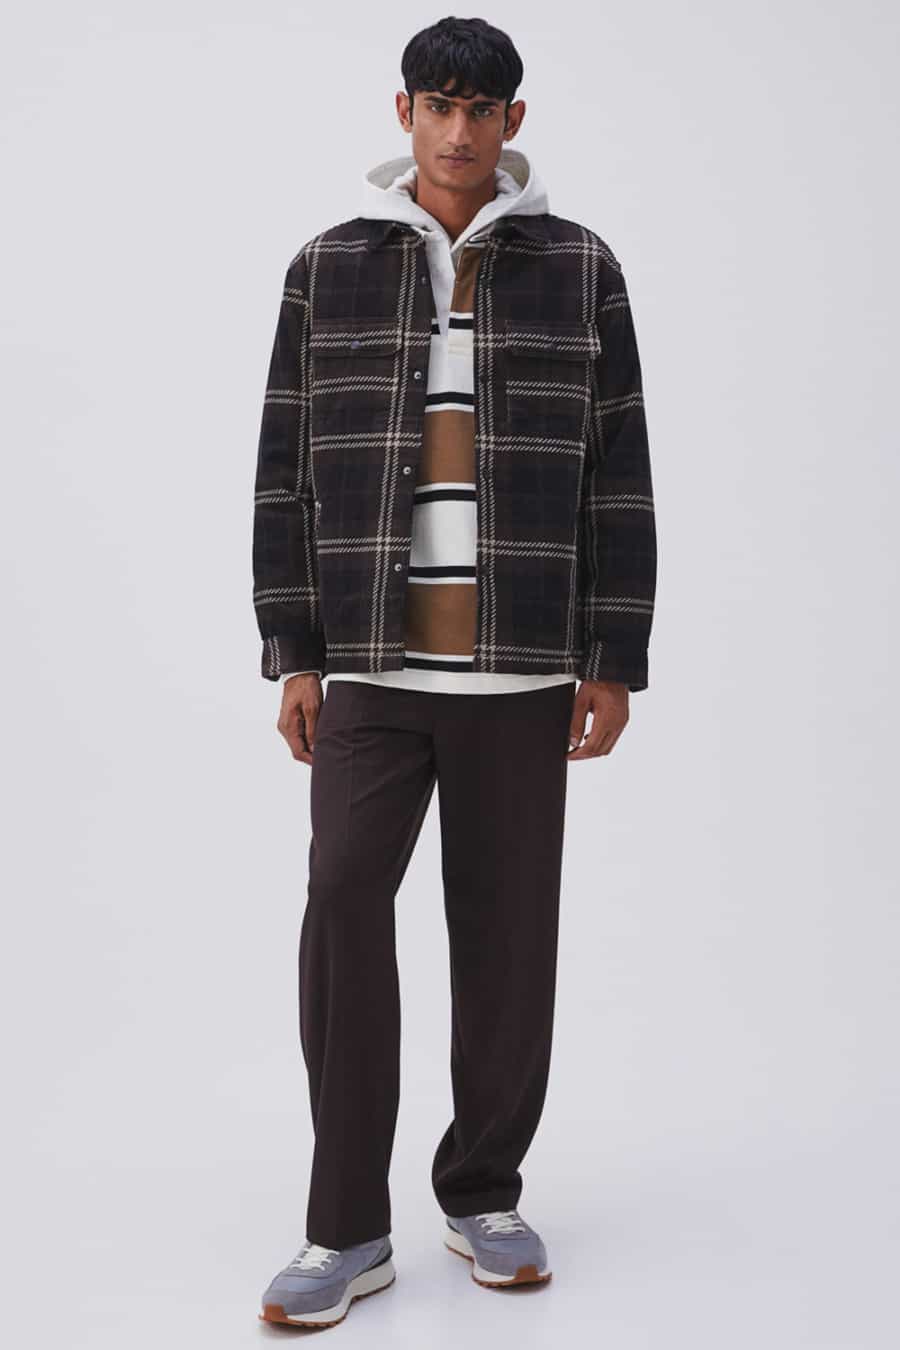 Men's brown trousers, white hoodie, brown rugby top and brown check flannel shirt outfit